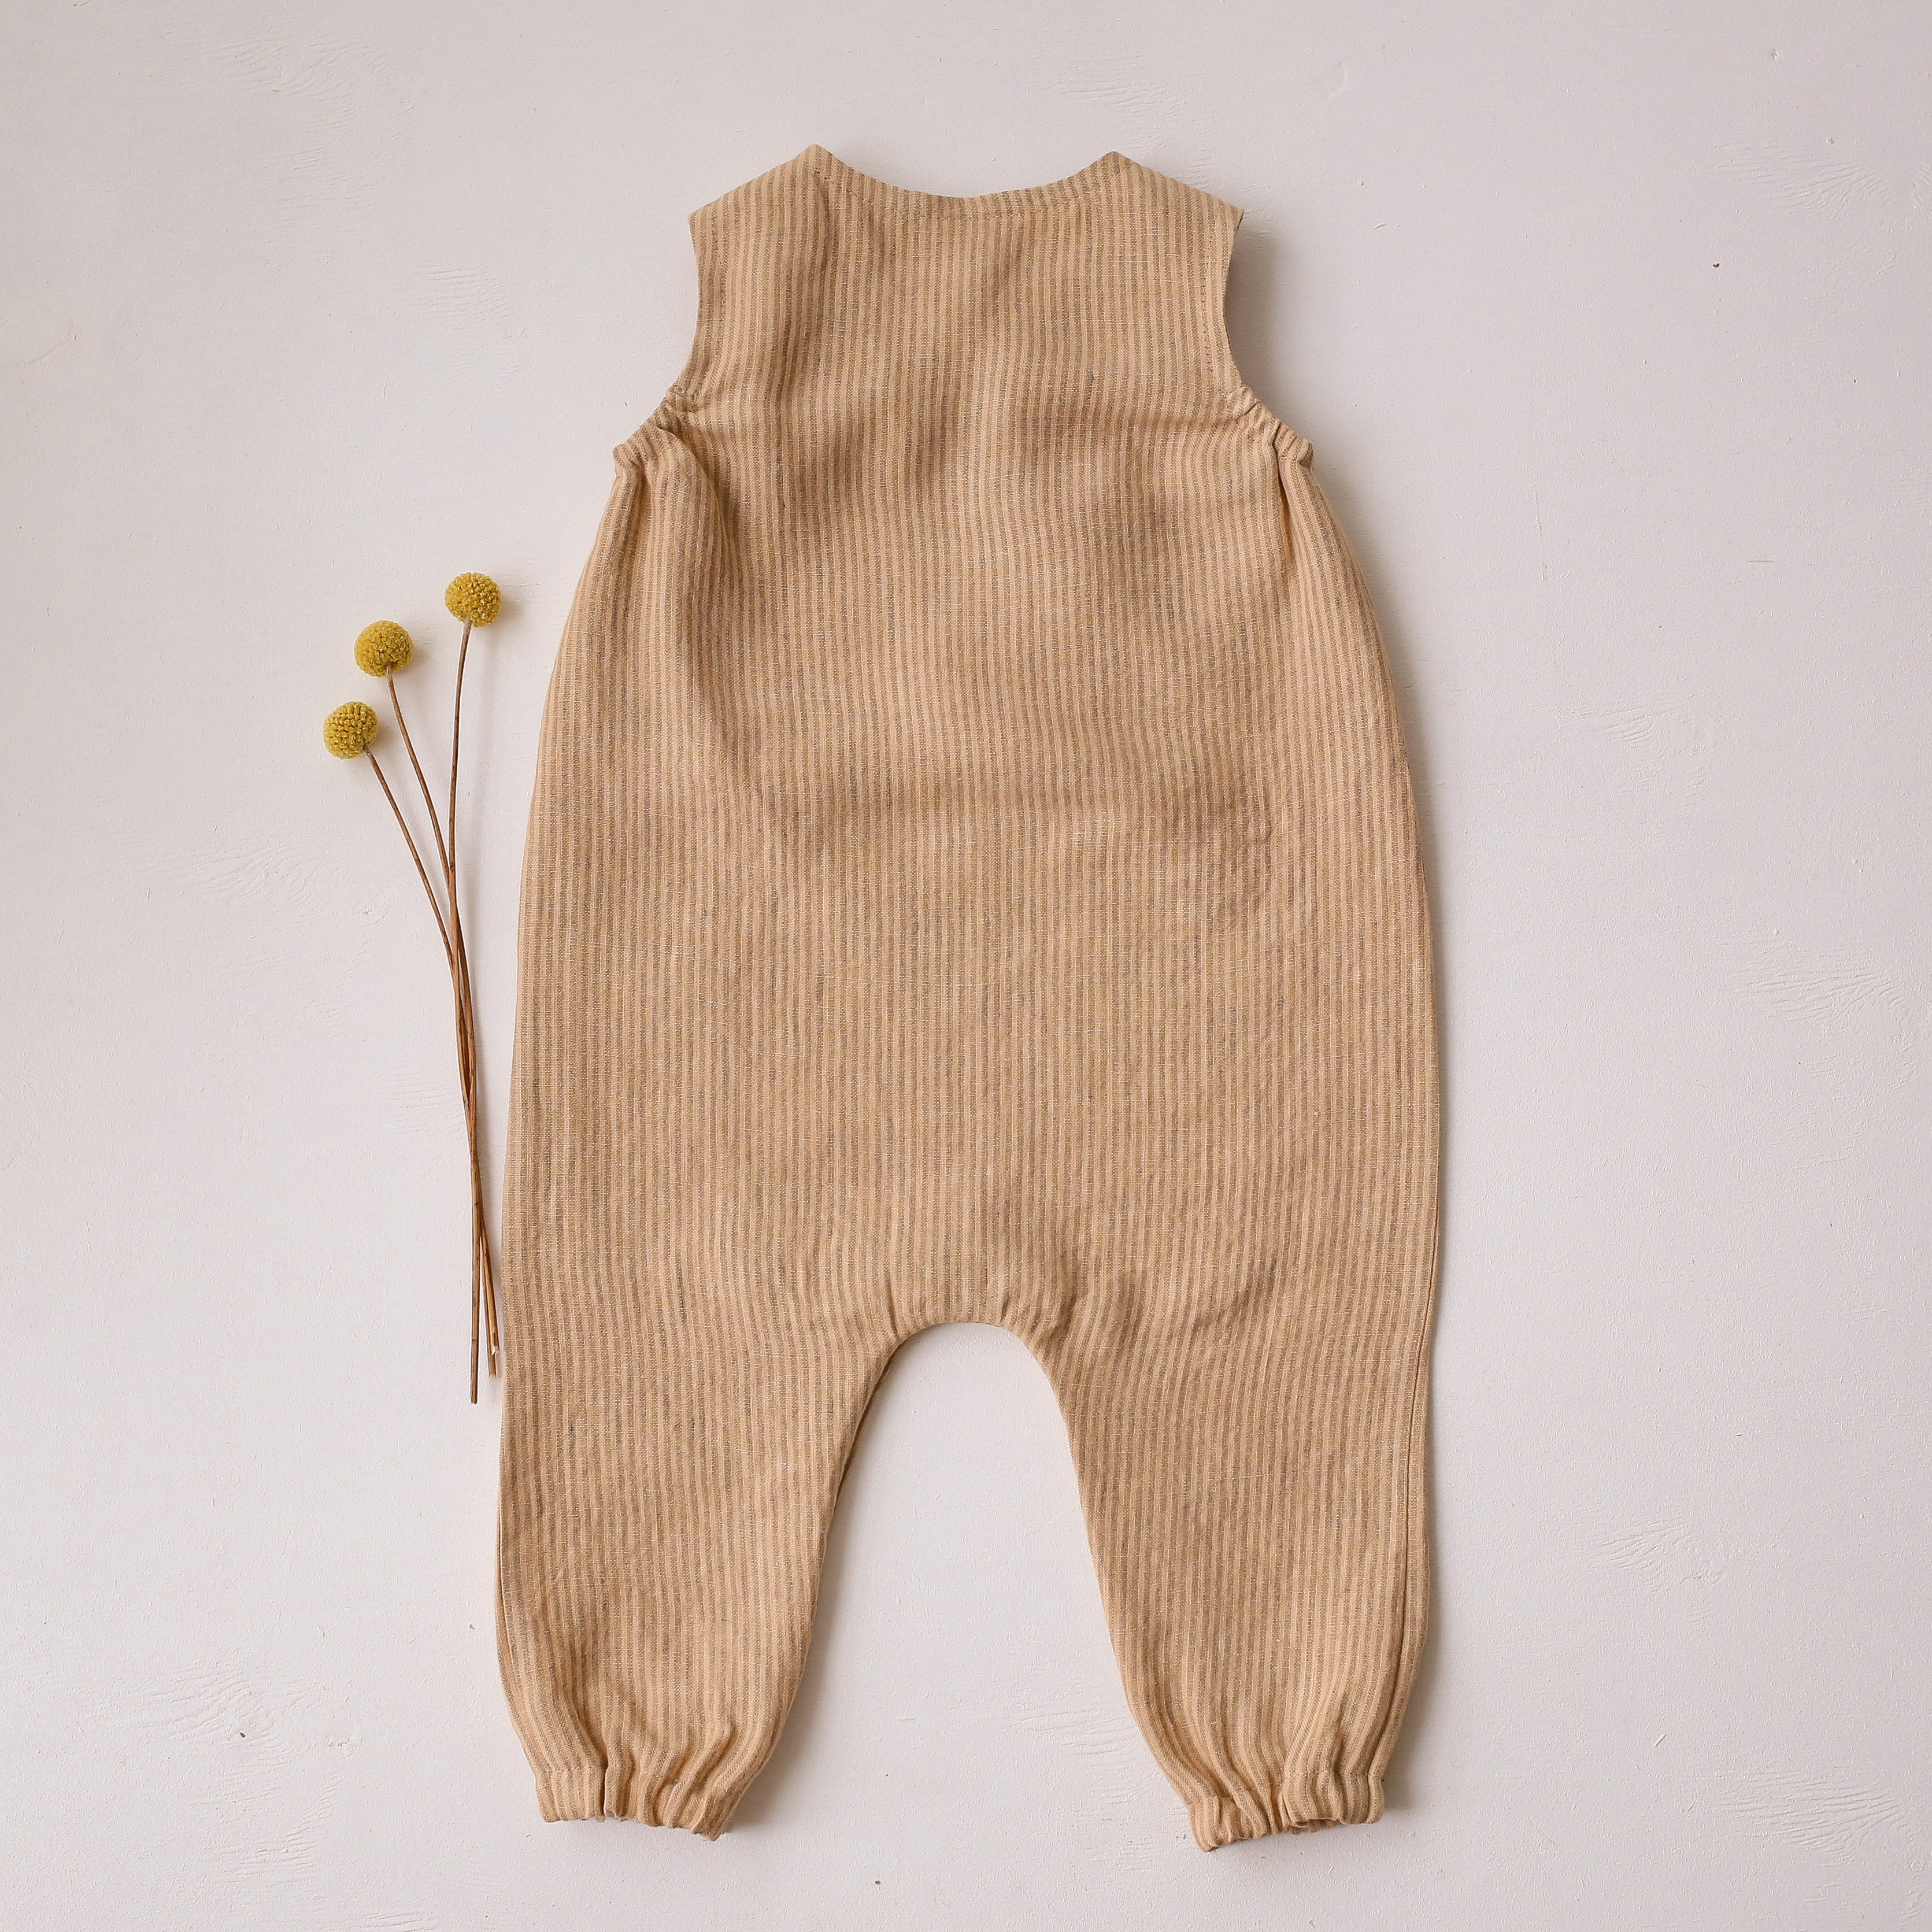 Desert Tan Stripe Linen Shoulder Closure Romper with "Mouse and Mushrooms" Embroidery